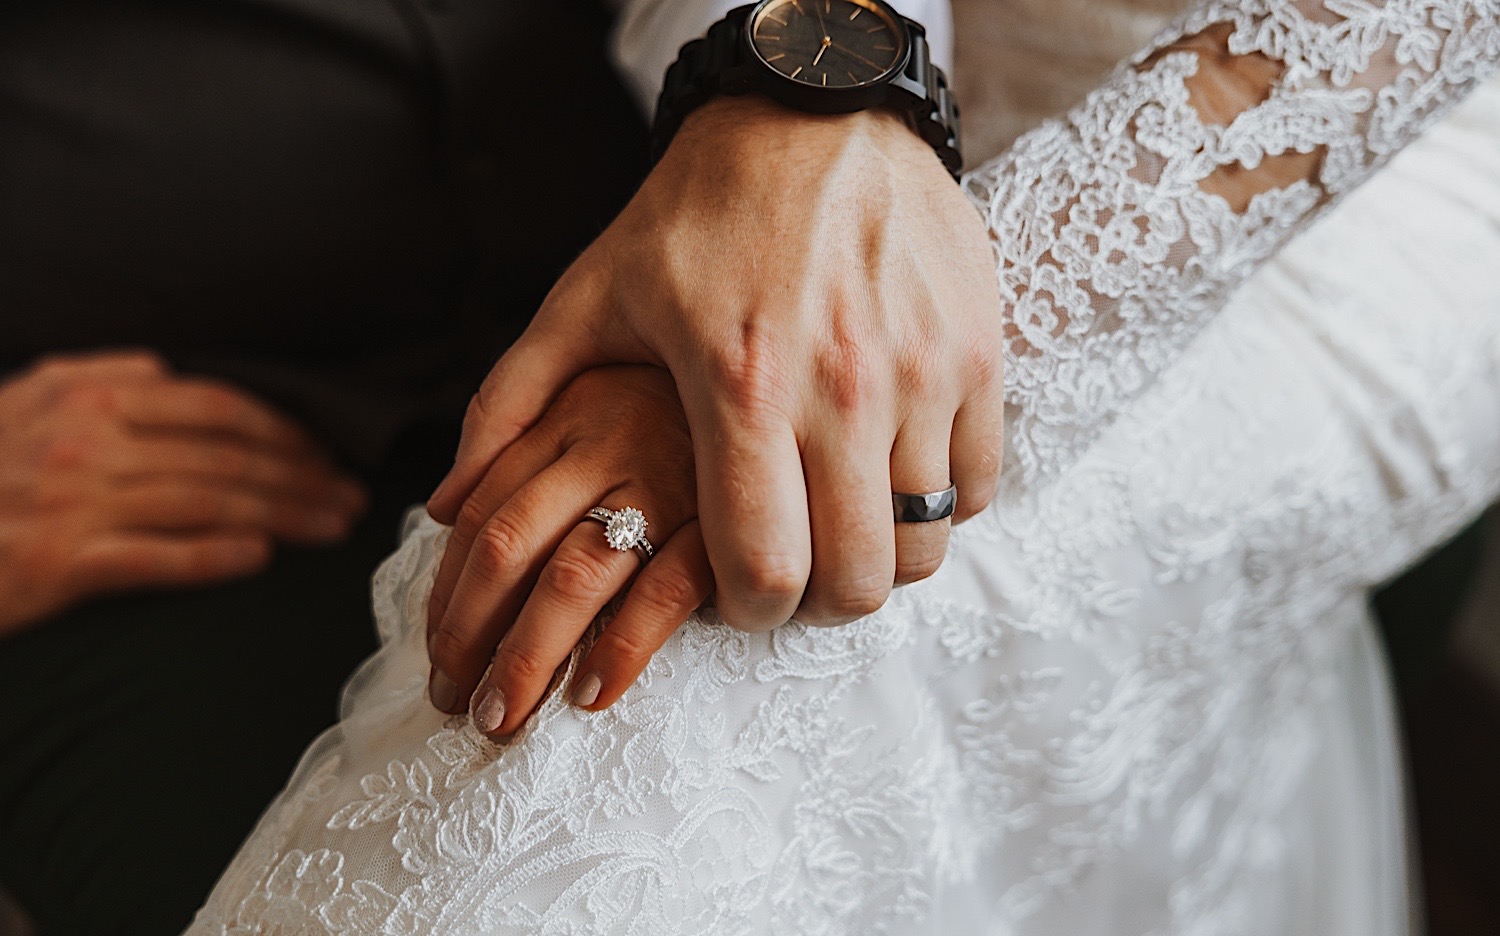 Close up photo of a bride and groom's hand's holding one another while on the bride's lap showing off their wedding rings